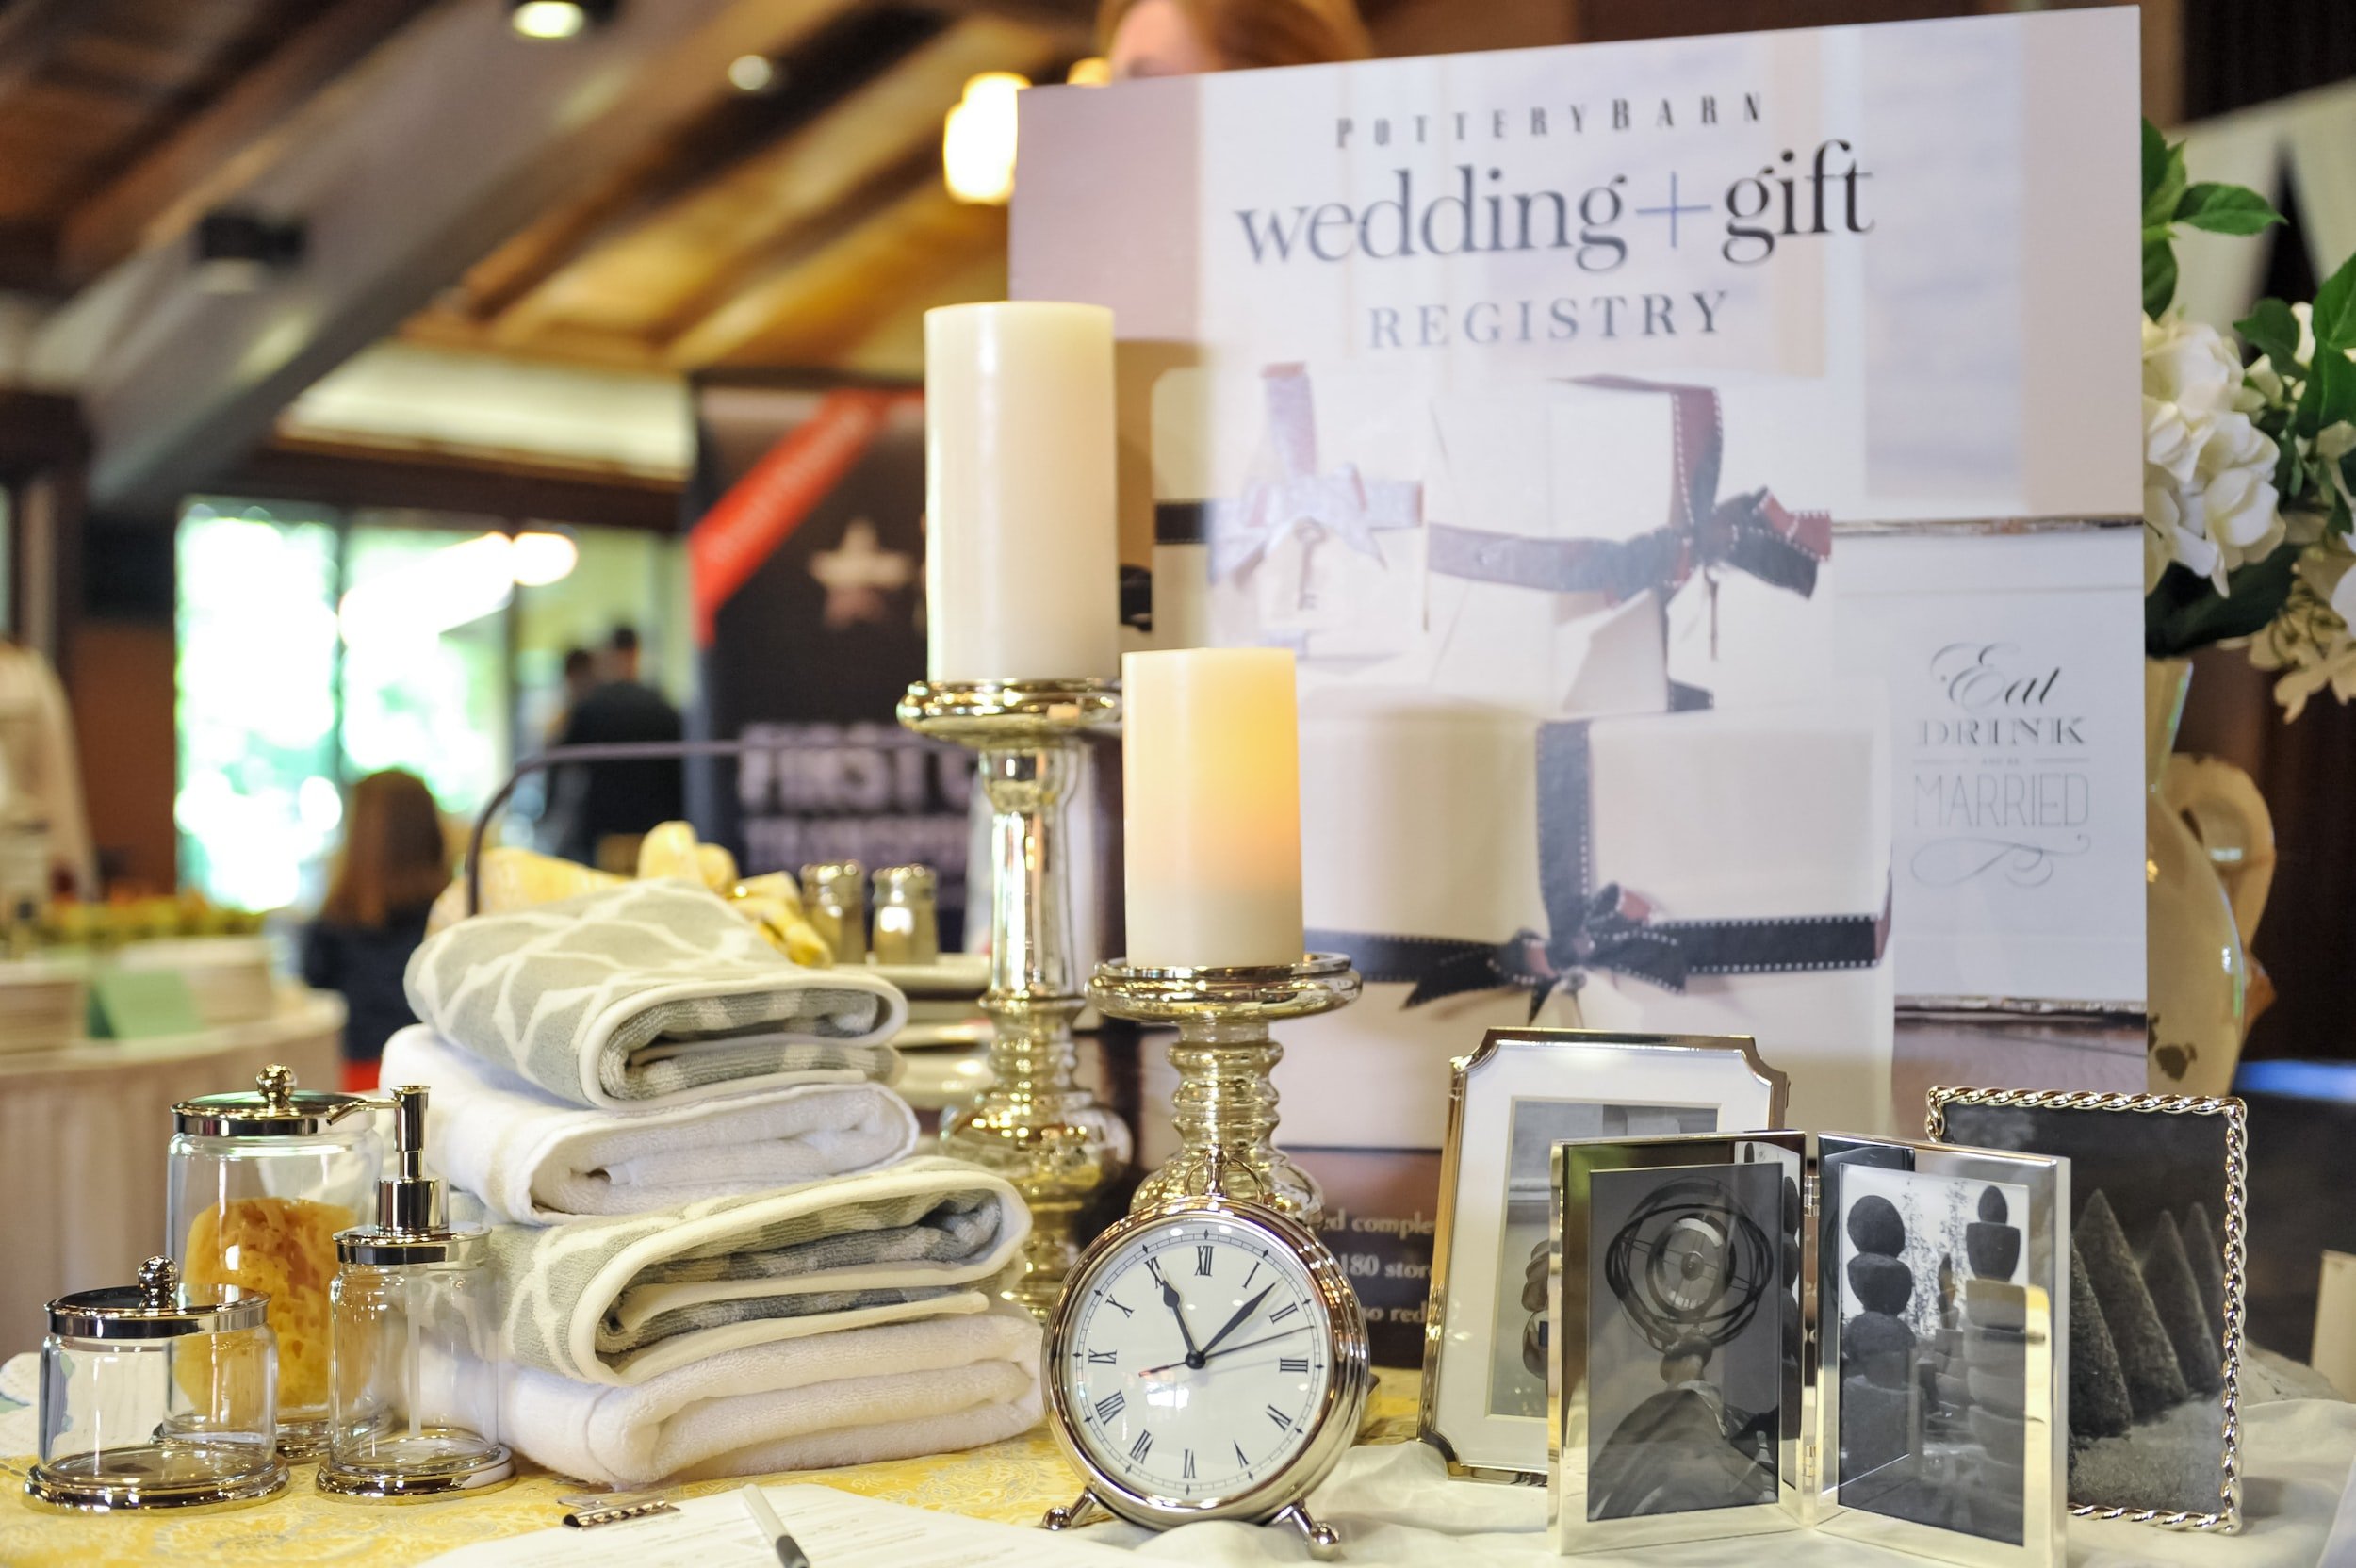 Gift ideas for newlyweds they probably don't have on their registry